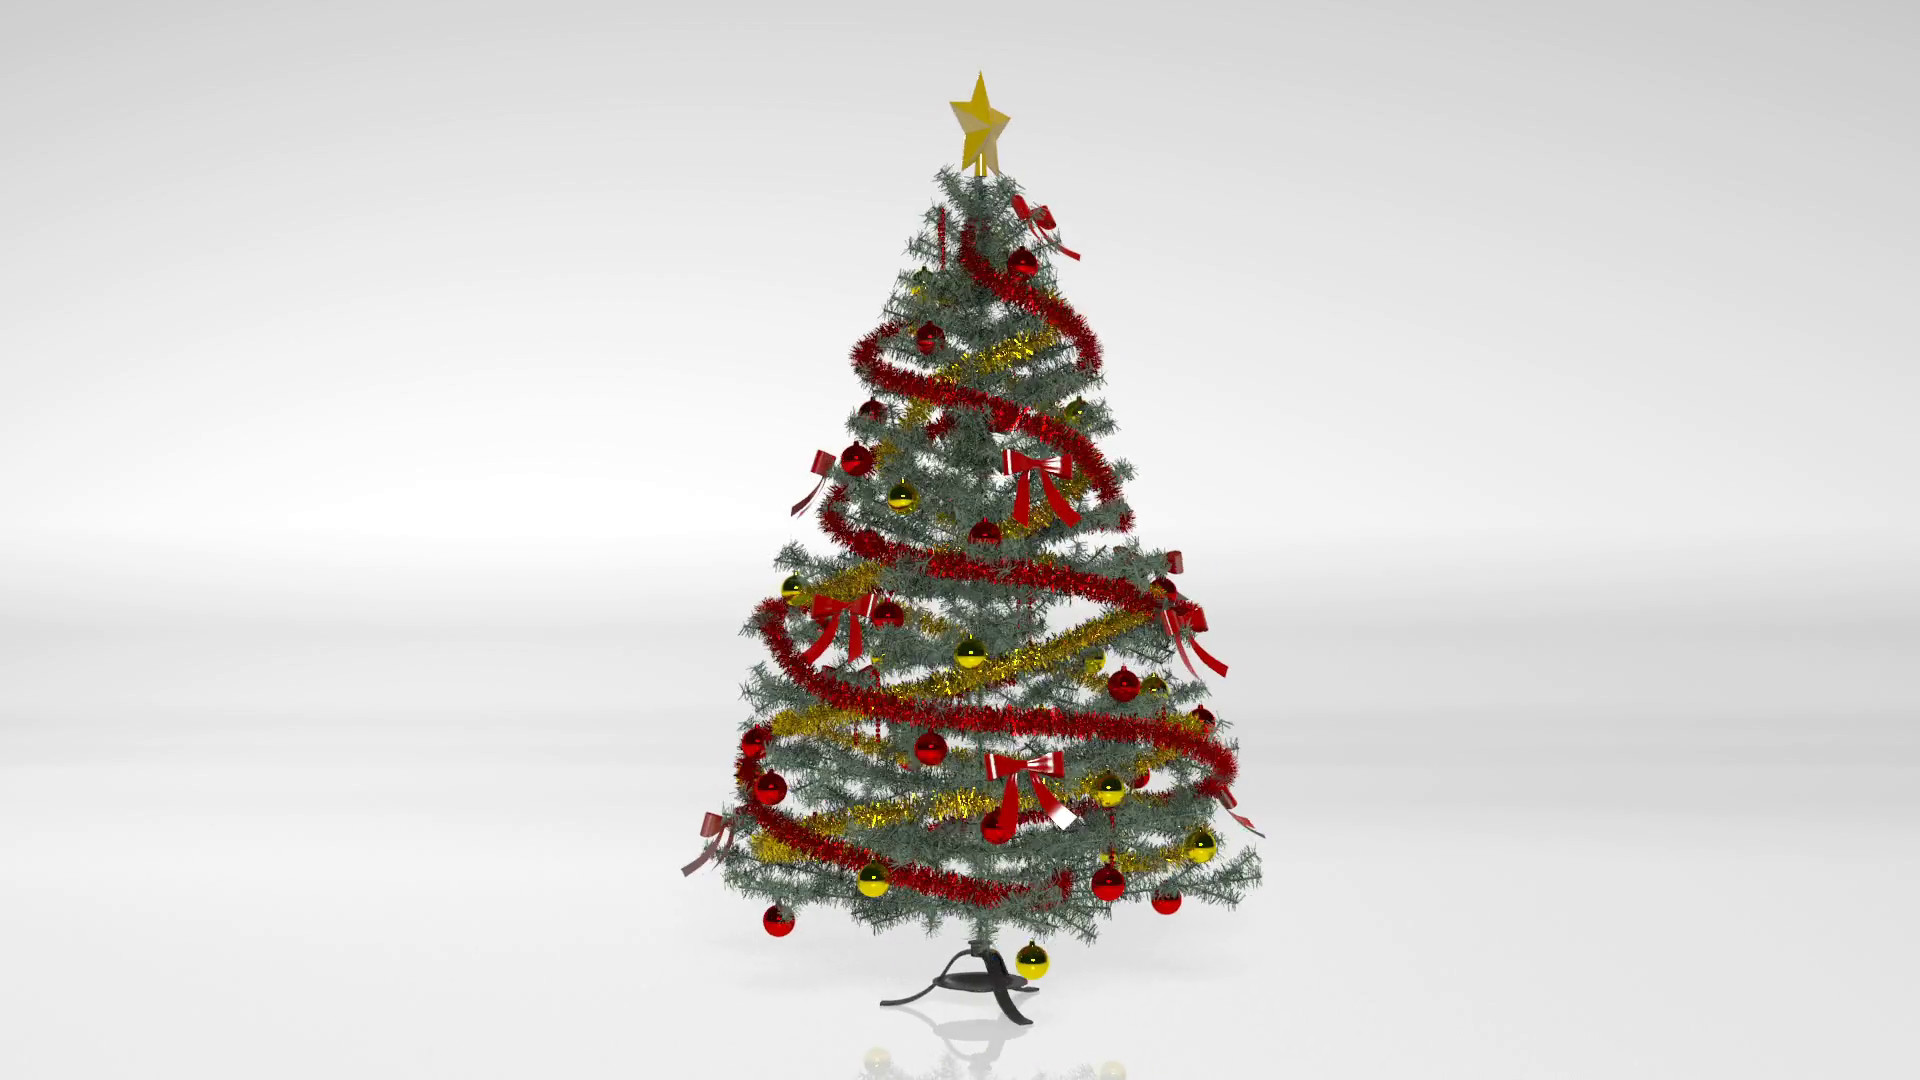 1920x1080 Christmas Tree With Decorations And Ornaments Isolated On White Background  Motion Background - Storyblocks Video